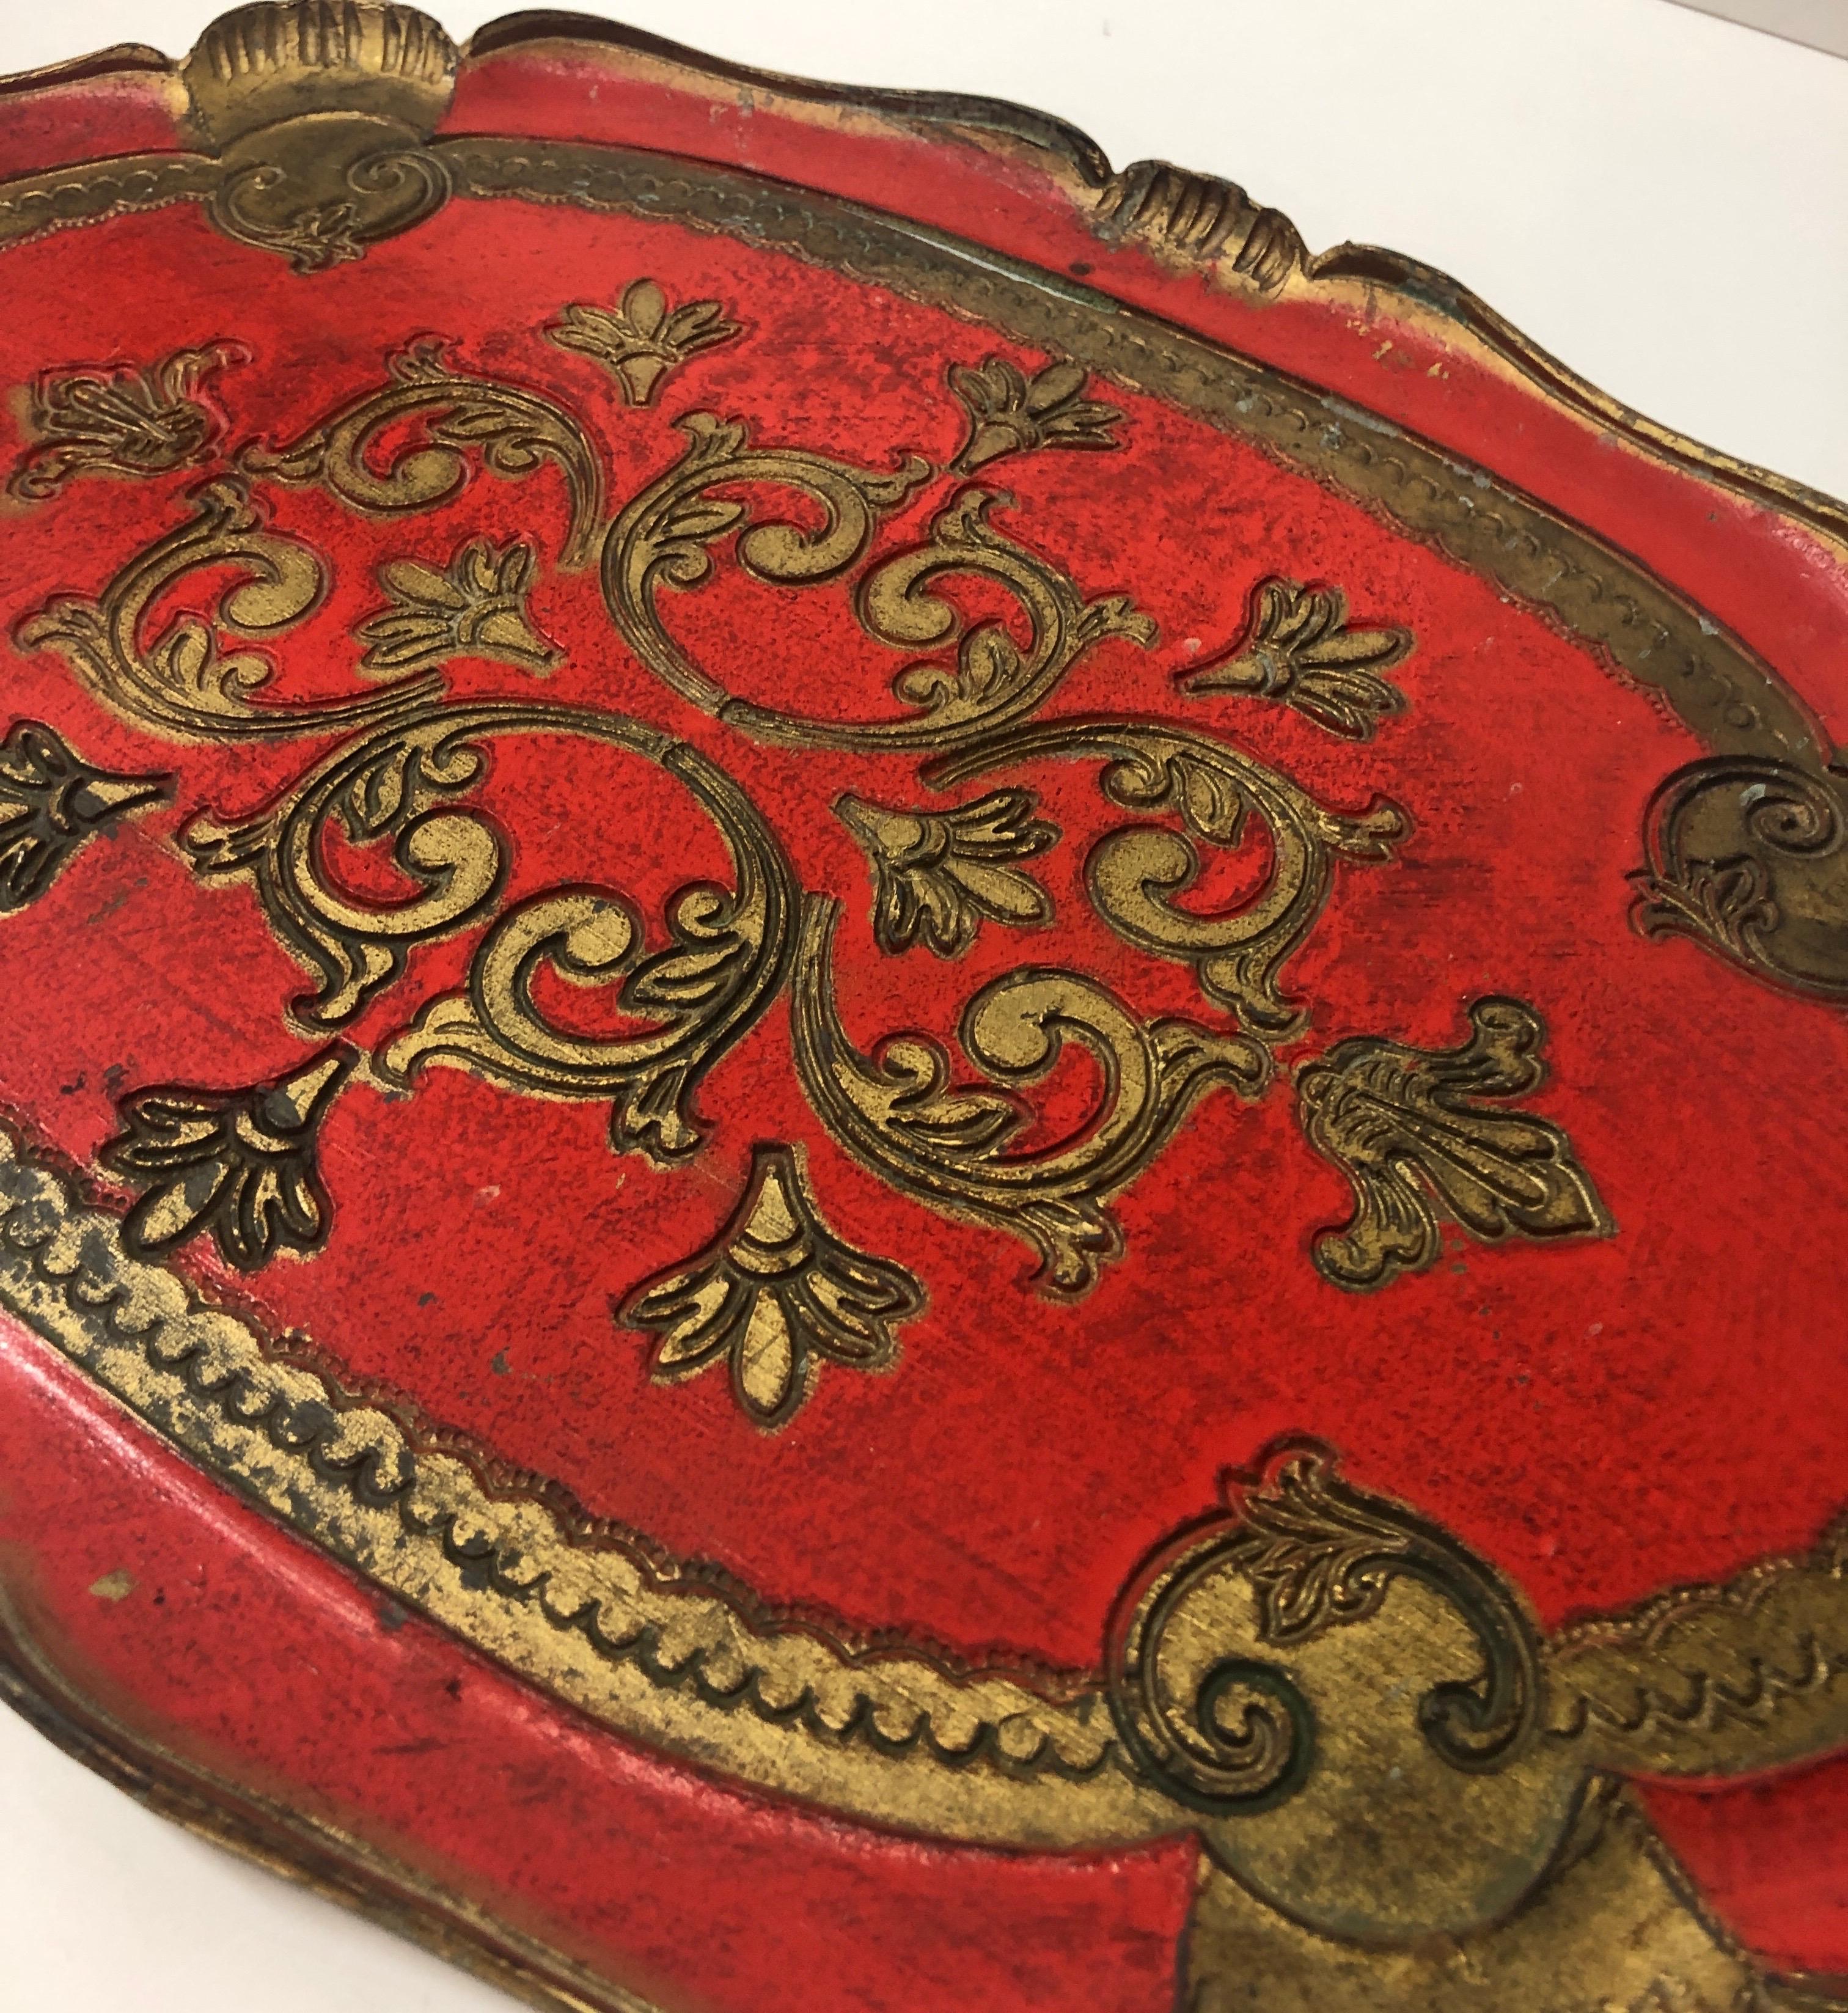 Regency Large Red and Gold Florentine Serving Tray